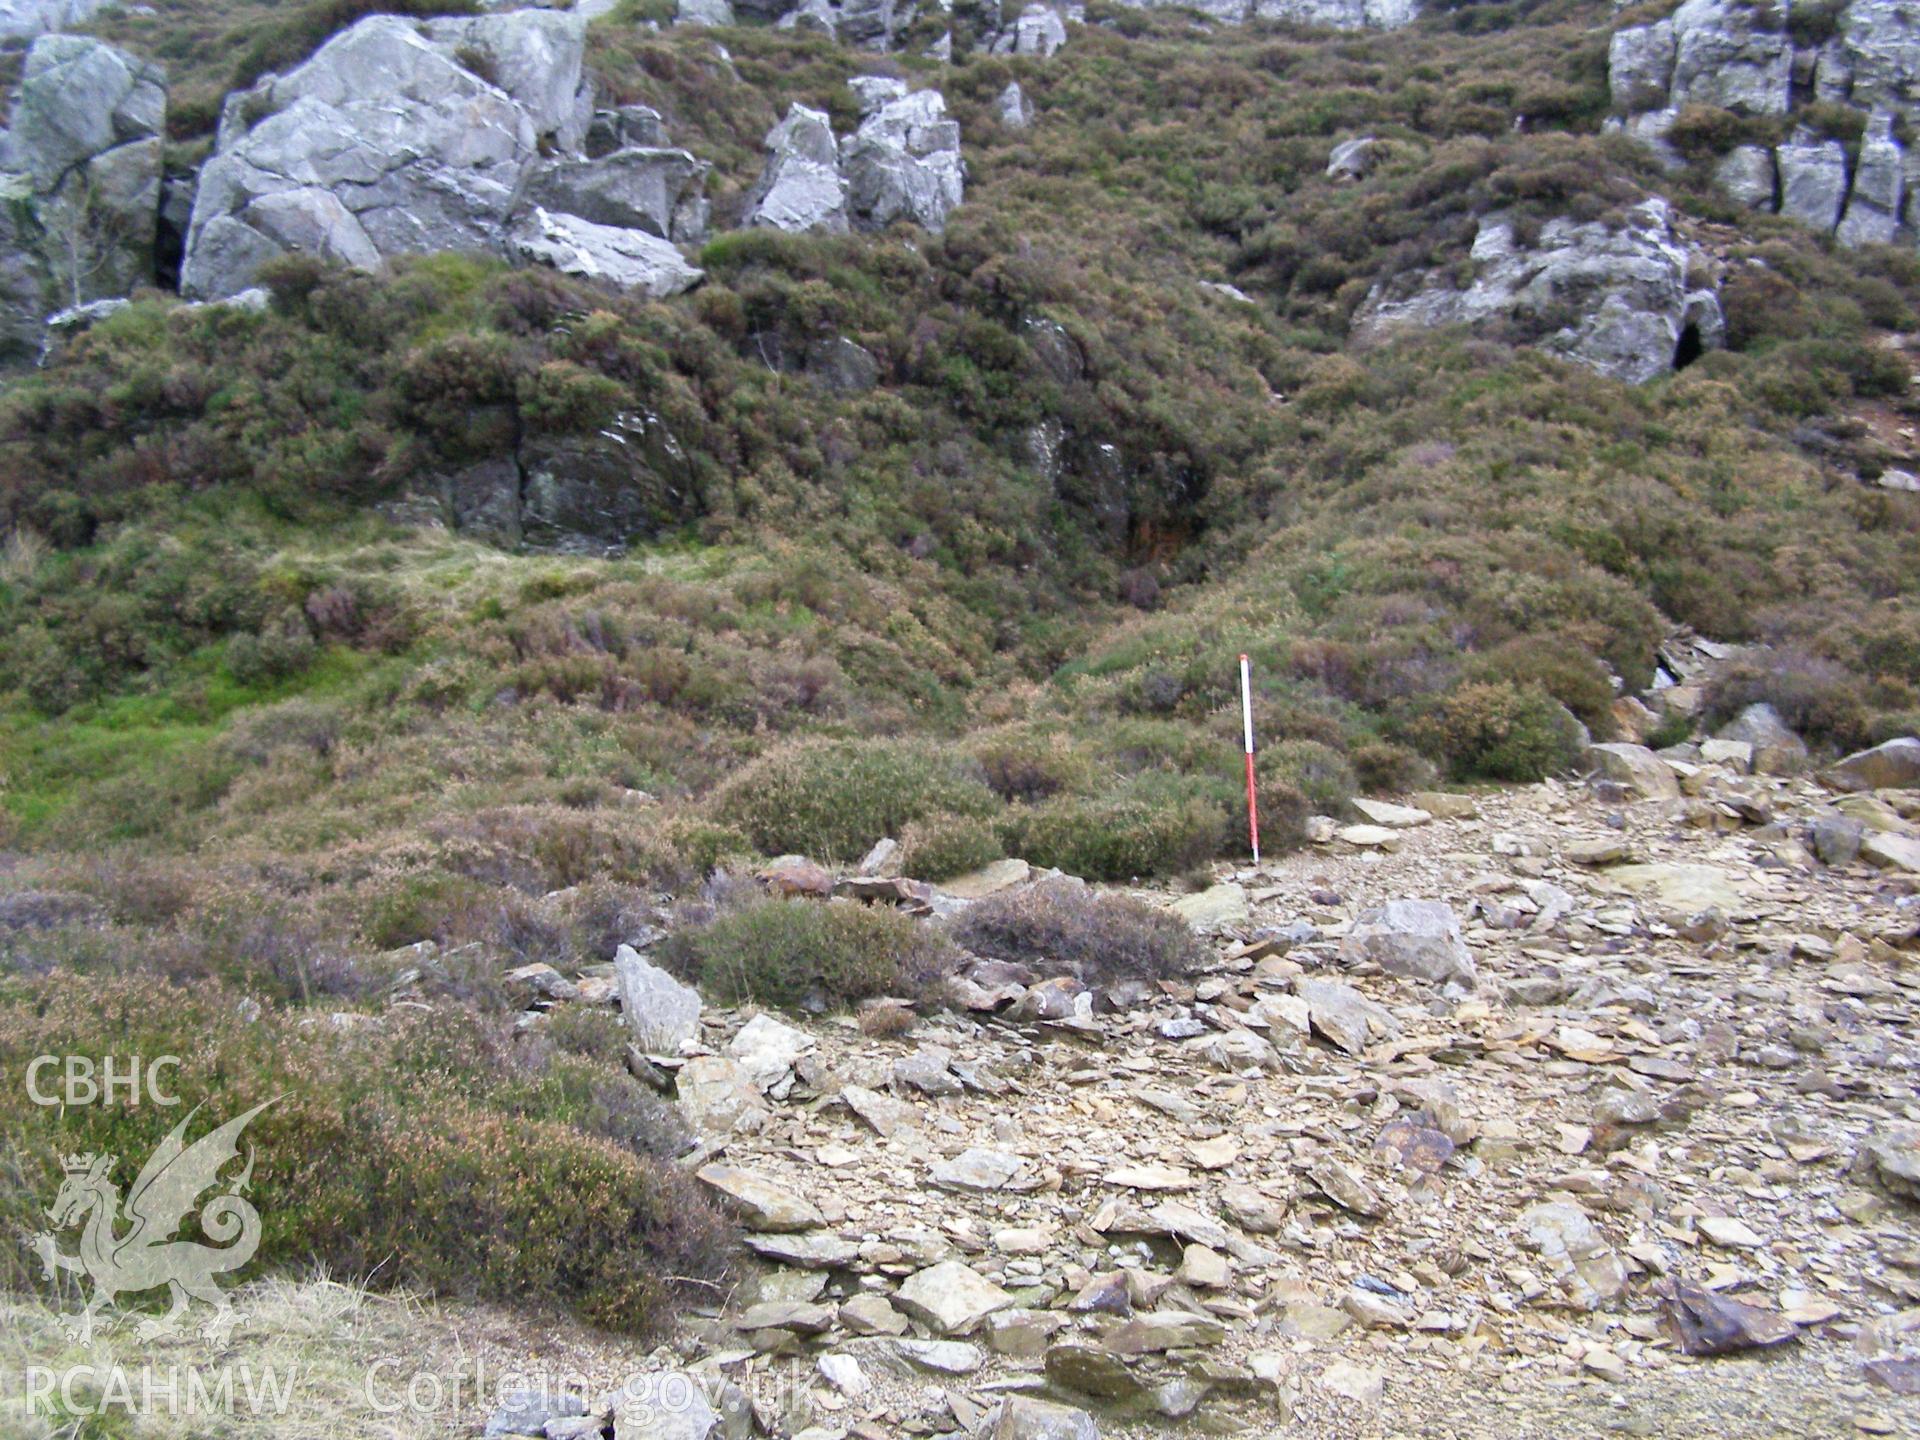 Photograph of Clogwyn Y Barcut Trial Mine II taken on 13/01/2006 by P.J. Schofield during an Upland Survey undertaken by Oxford Archaeology North.